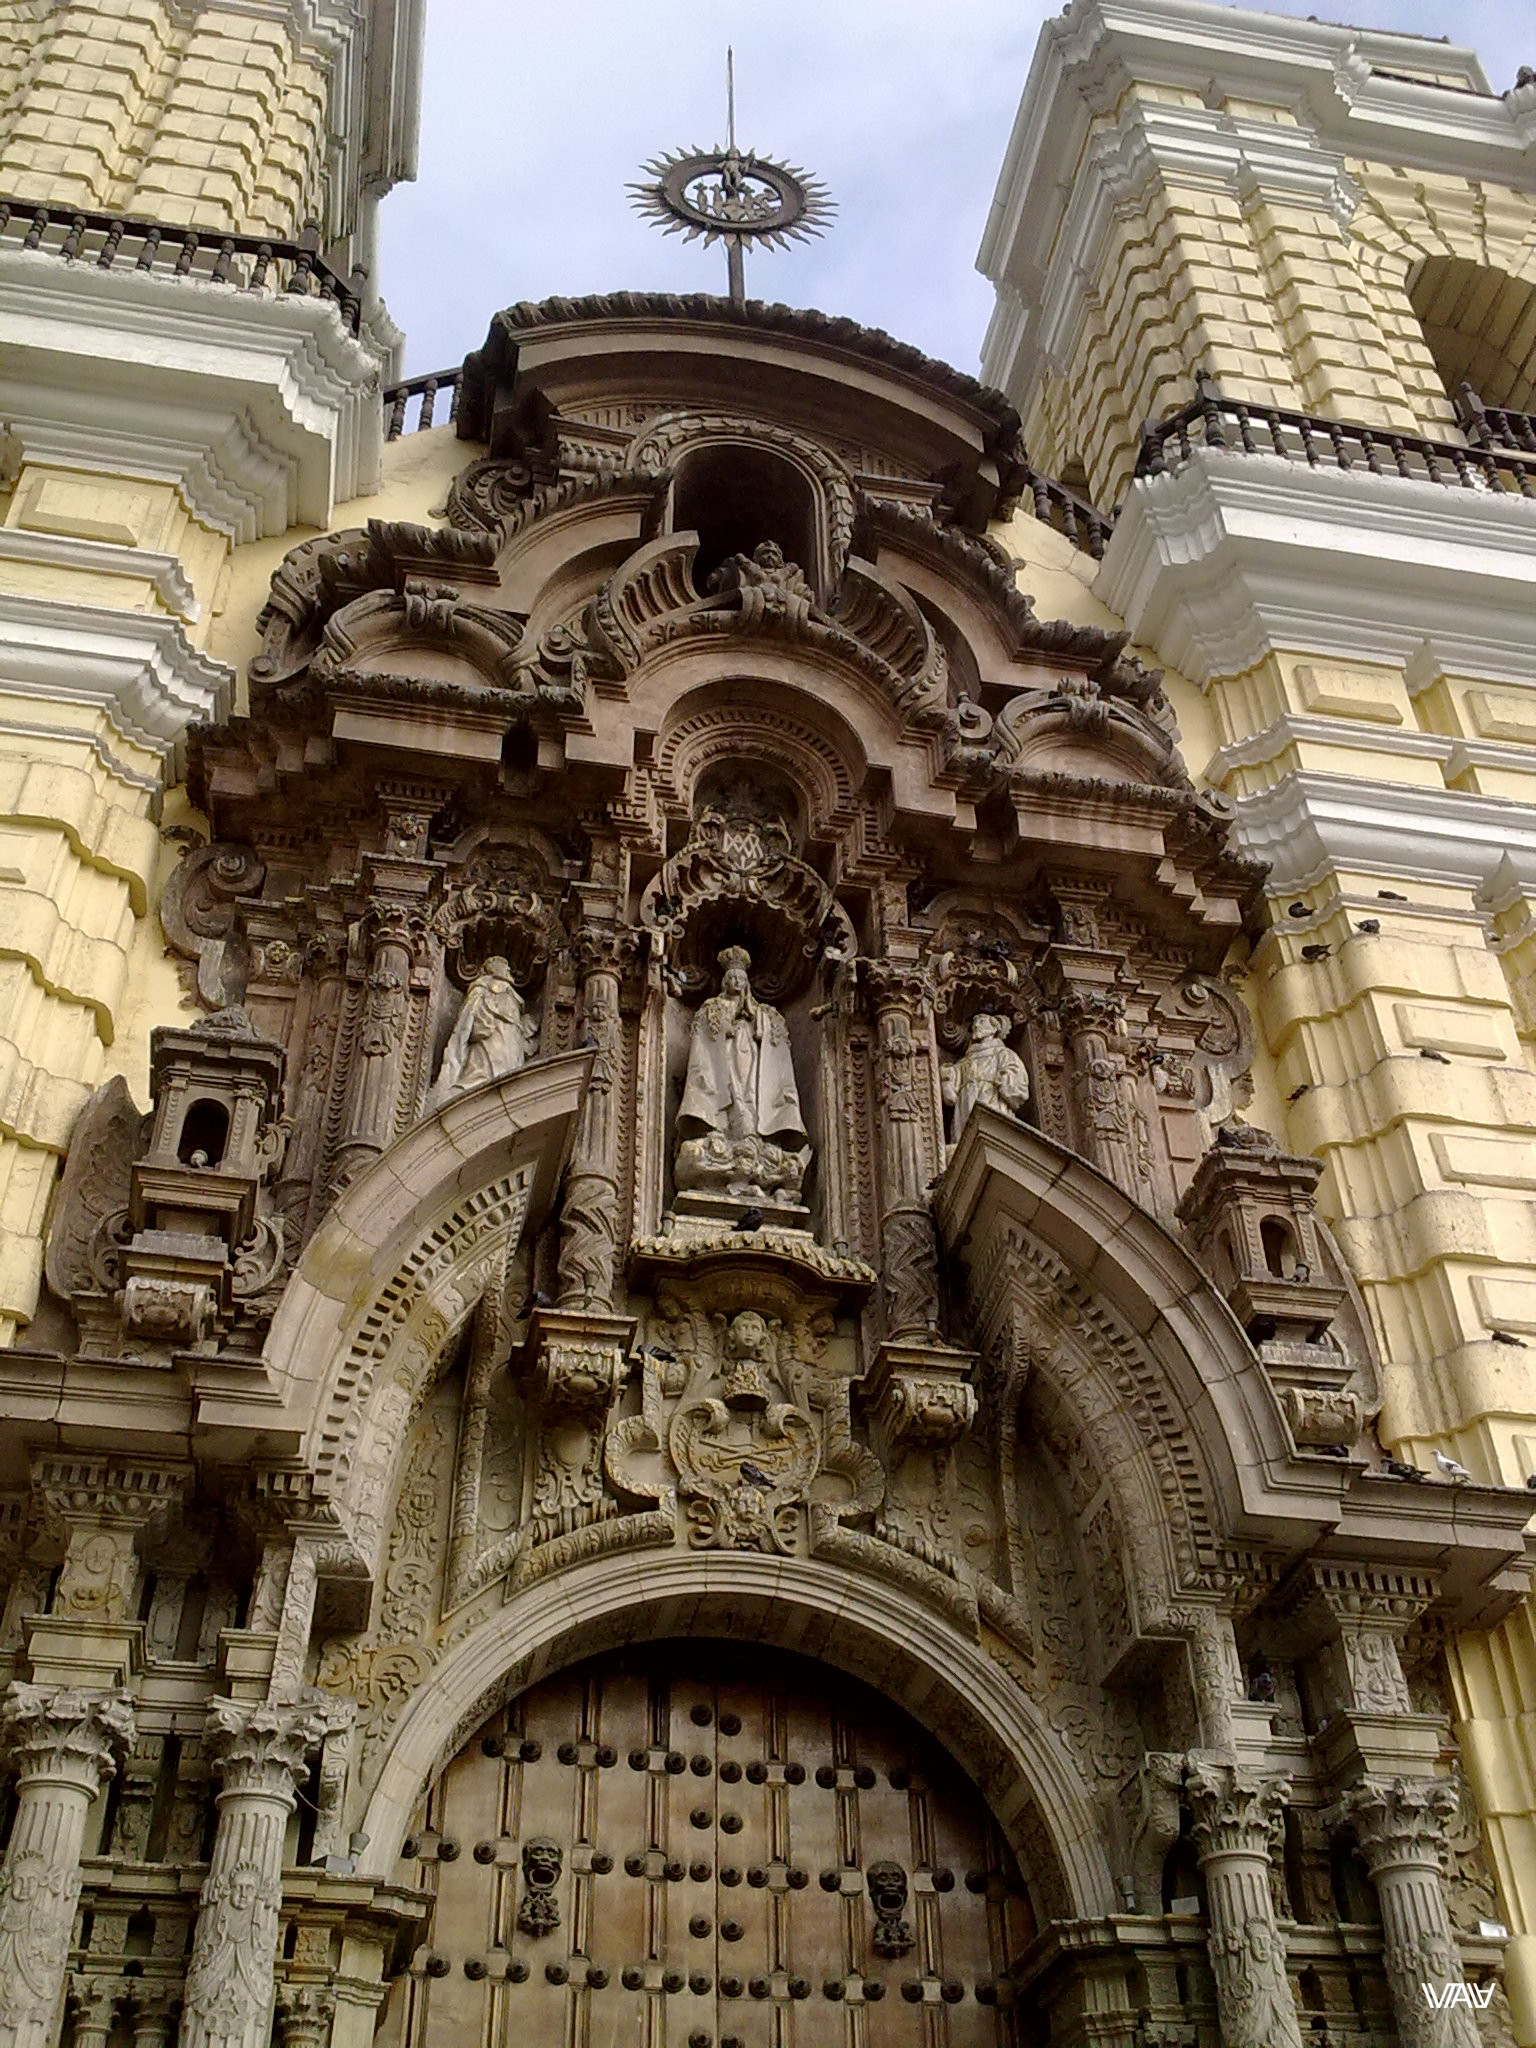 The decoration of churches is incredible in Lima, Peru.